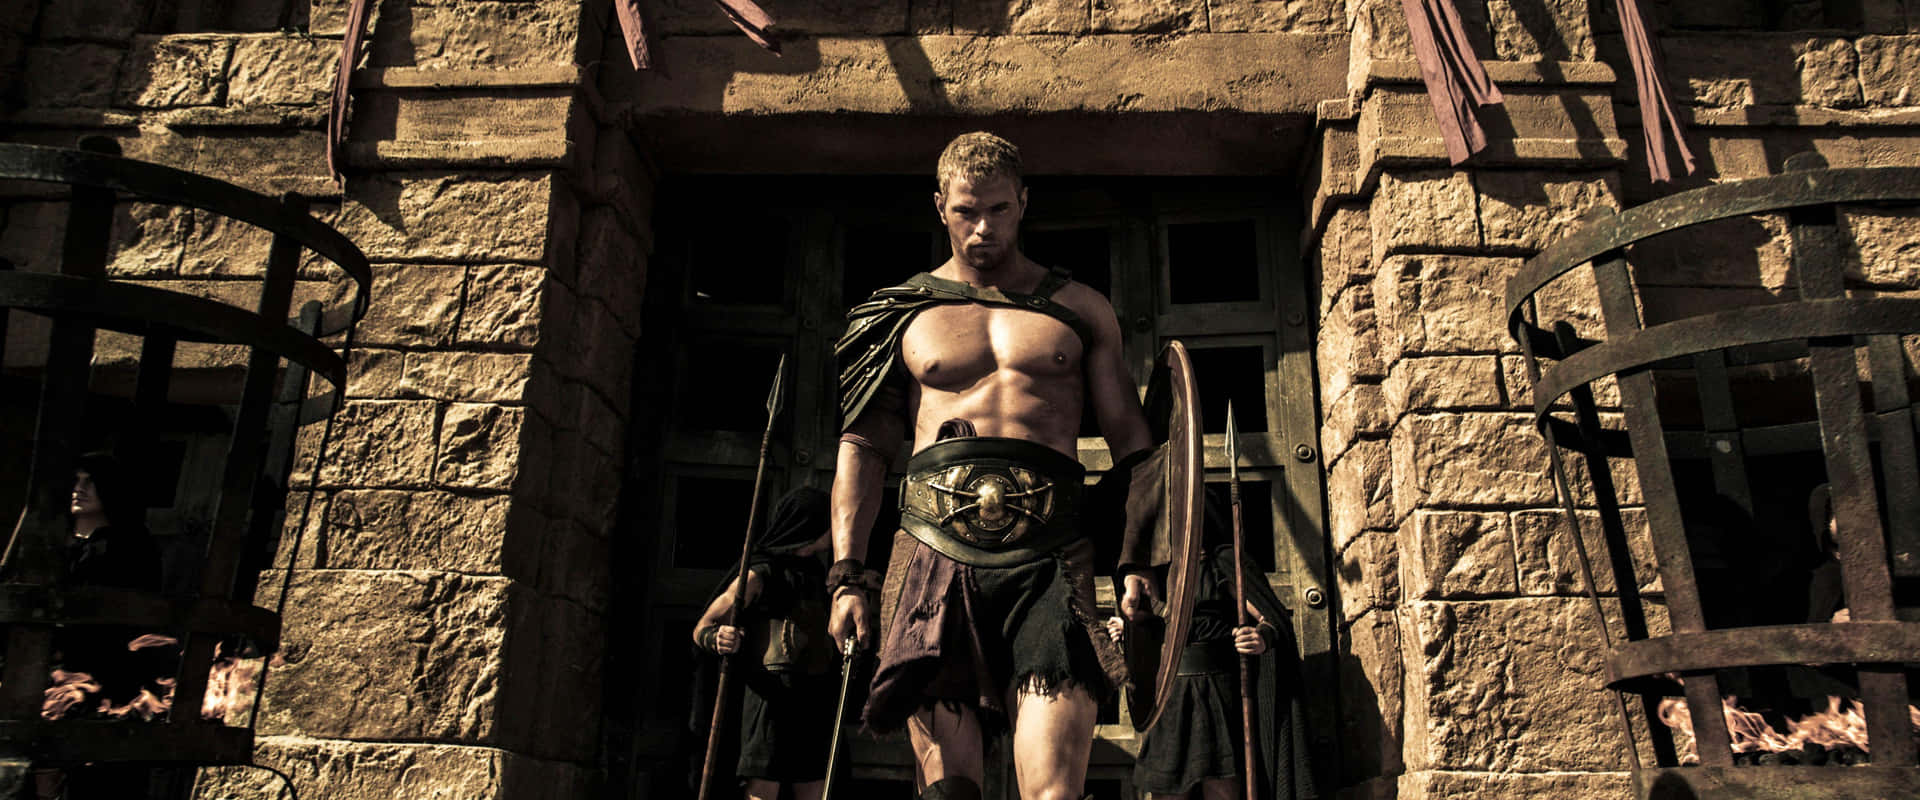 A Man In A Spartan Costume Standing In Front Of A Stone Building